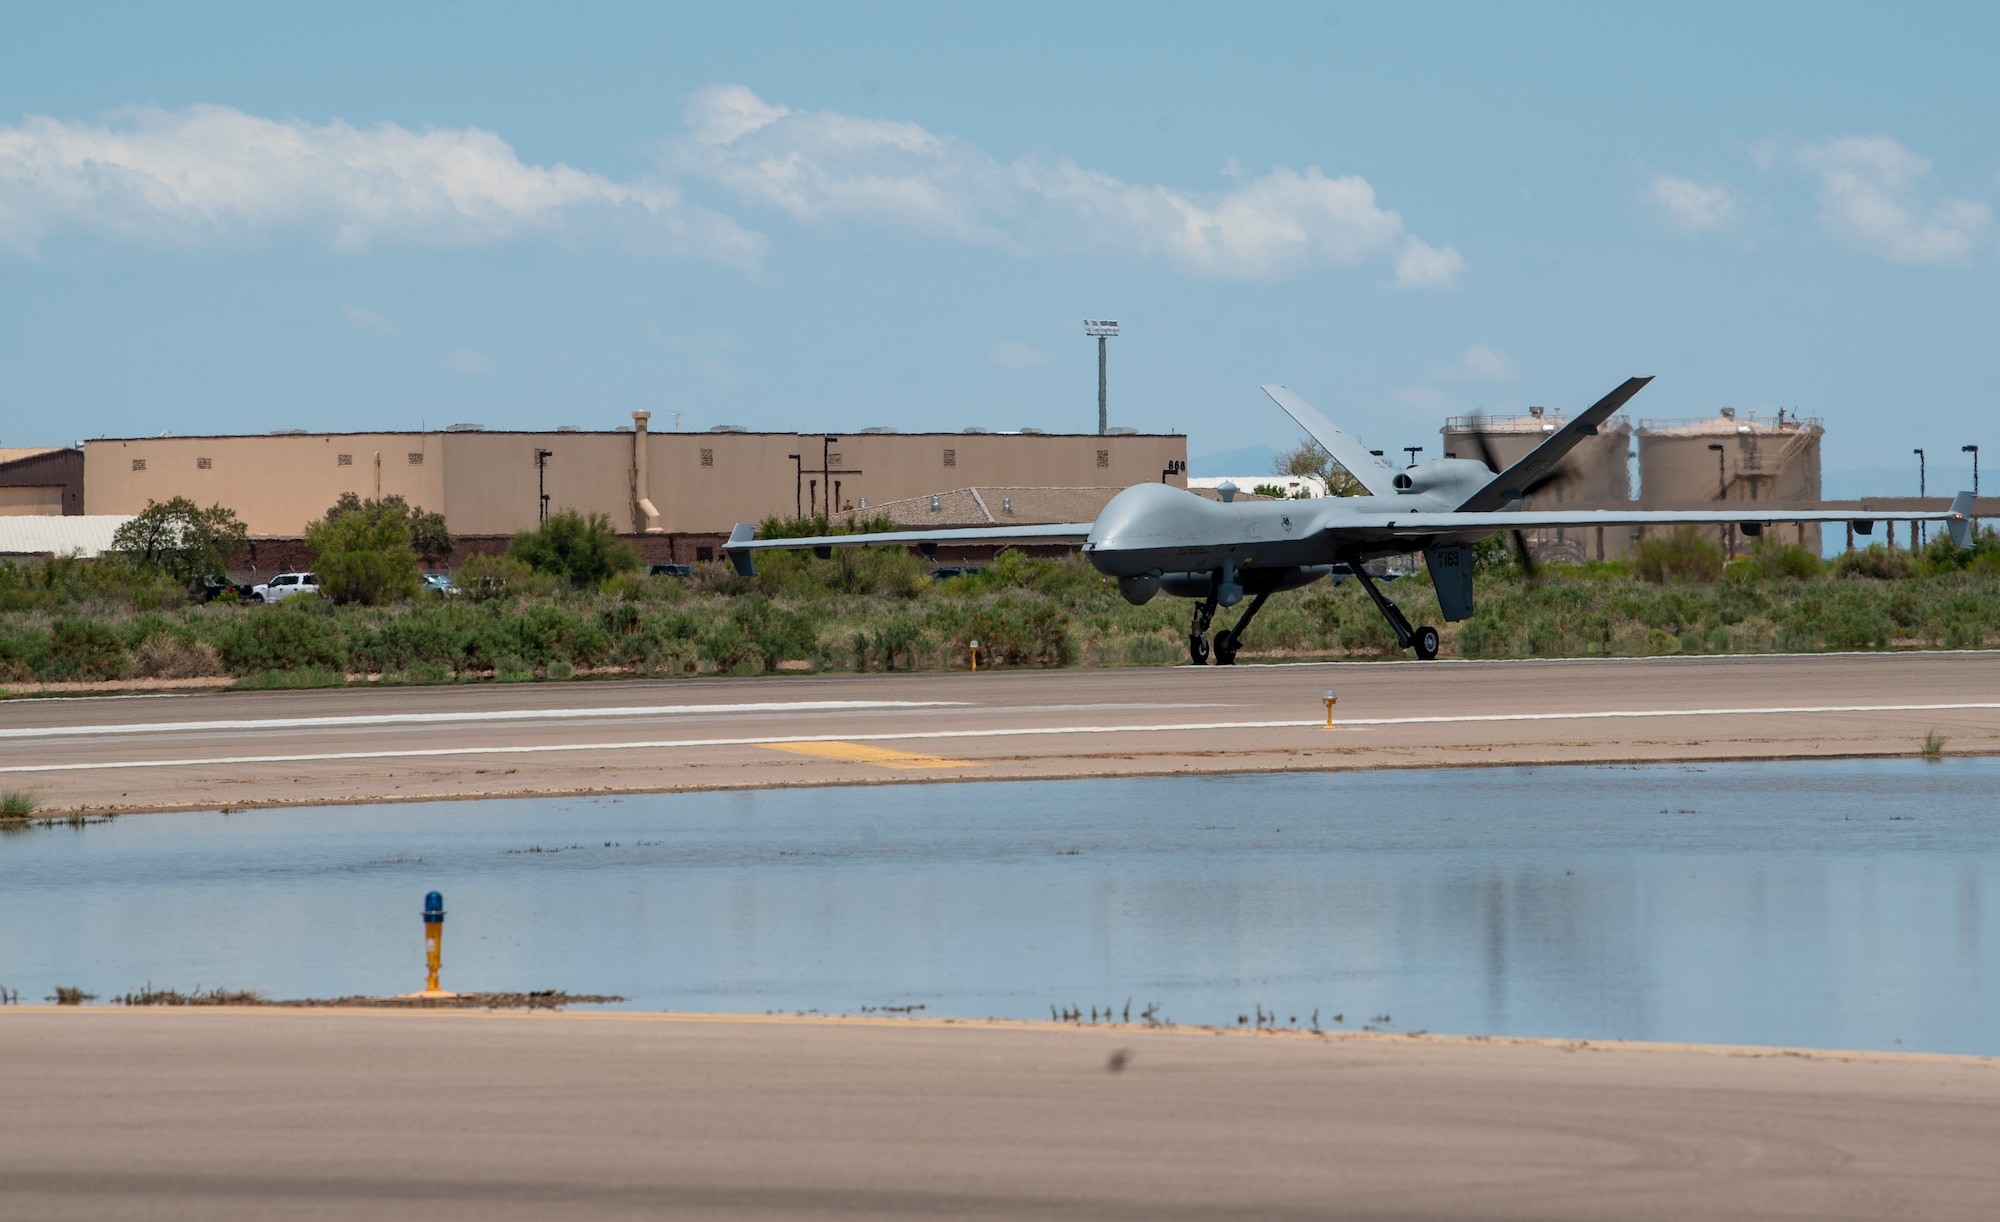 An MQ-9 Reaper from Creech Air Force Base, Nevada, lands at Holloman AFB, New Mexico.